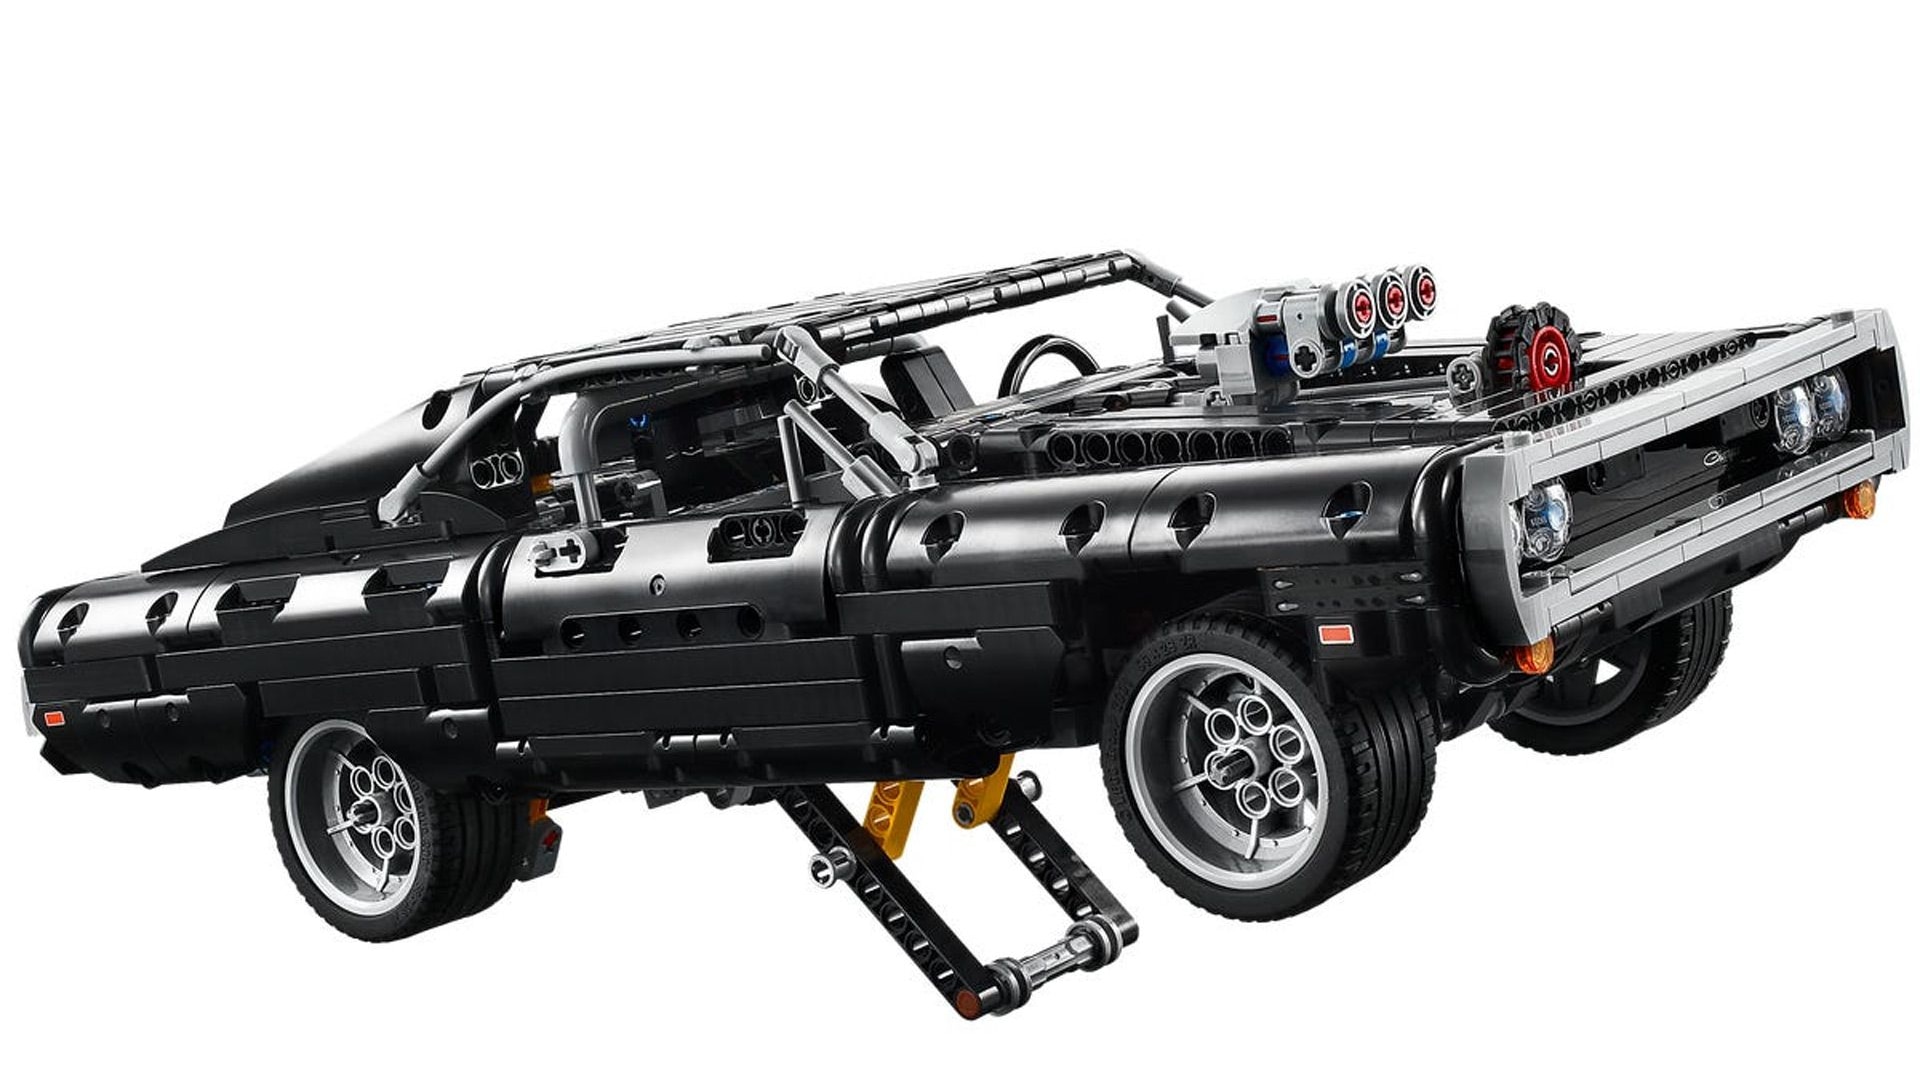 Dominic Toretto's 1970 Dodge Charger ready for Lego wheelies